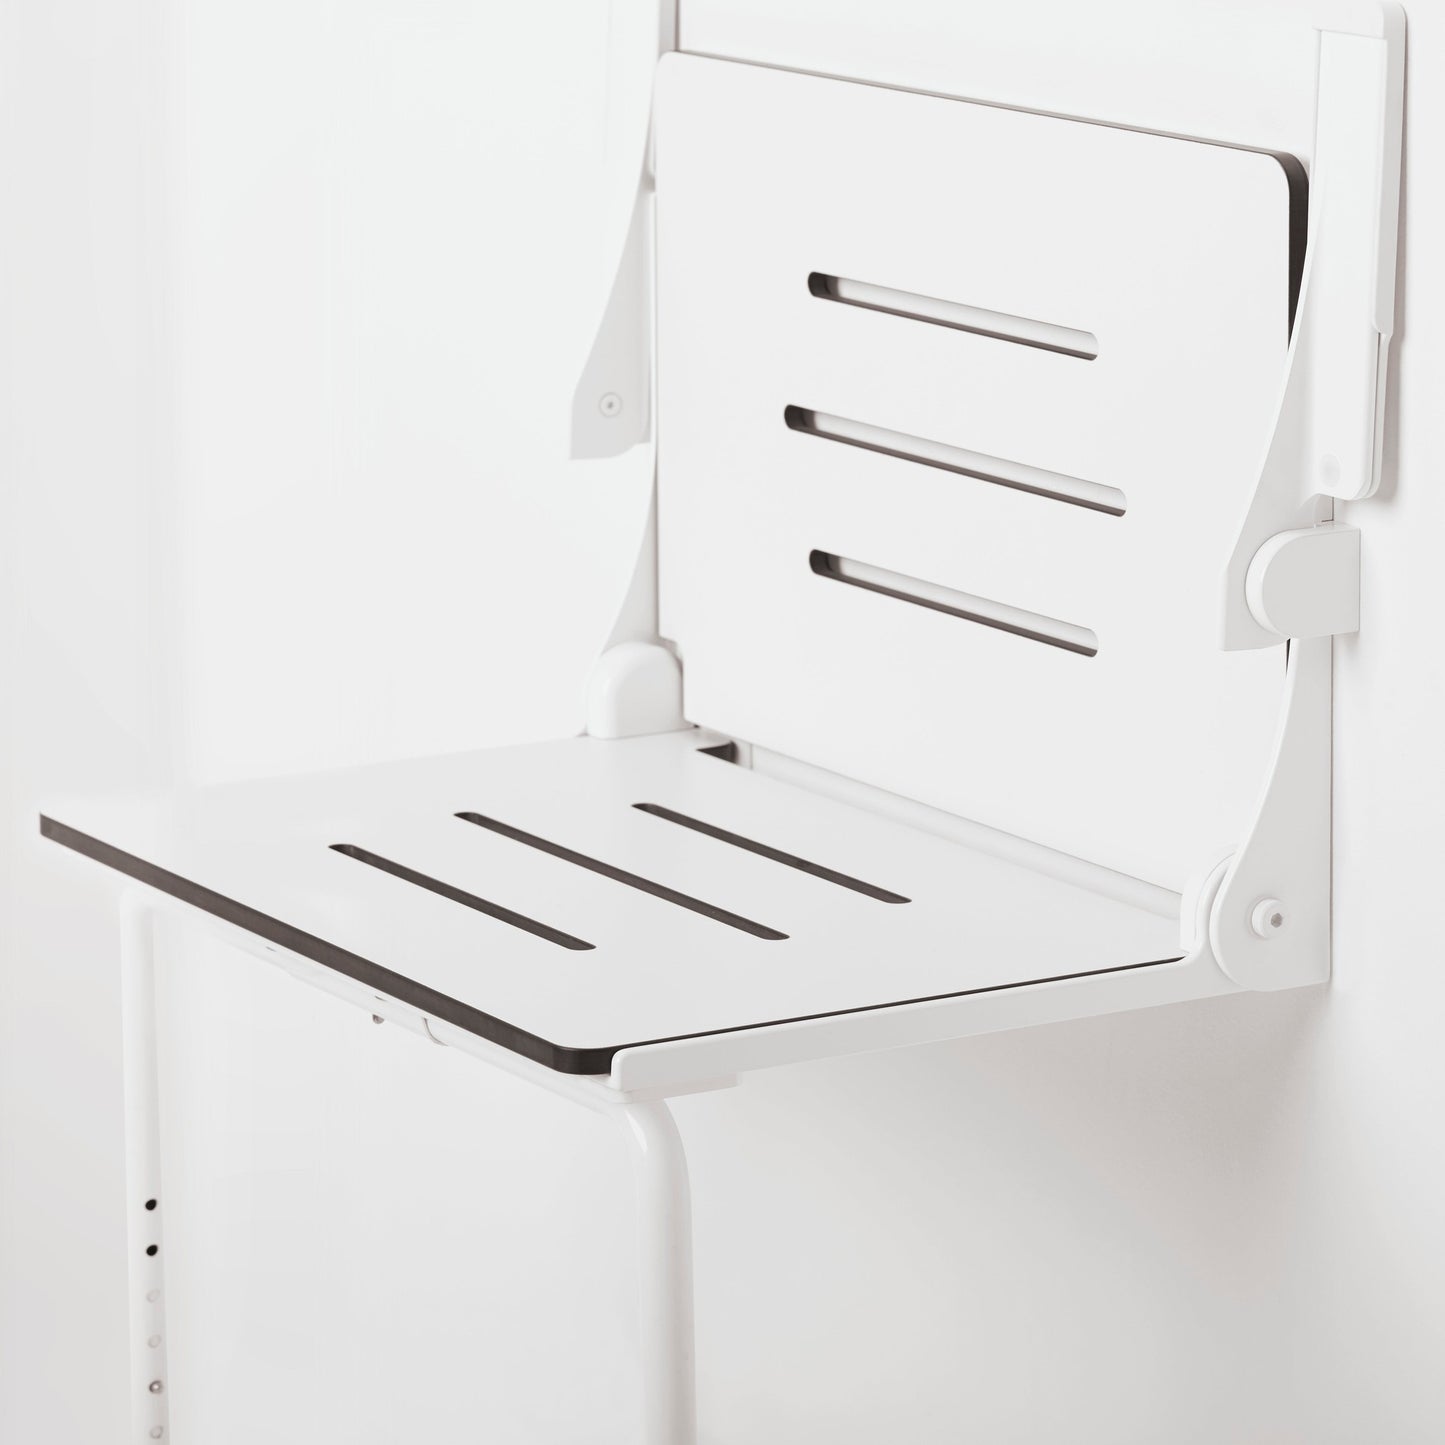 Seachrome Lifestyle & Wellness Silhouette 27" Phenolic White Seat Top With White Frame and Arm Pad Wall Mounted Comfort Plus Shower Seat With Swing Down Leg